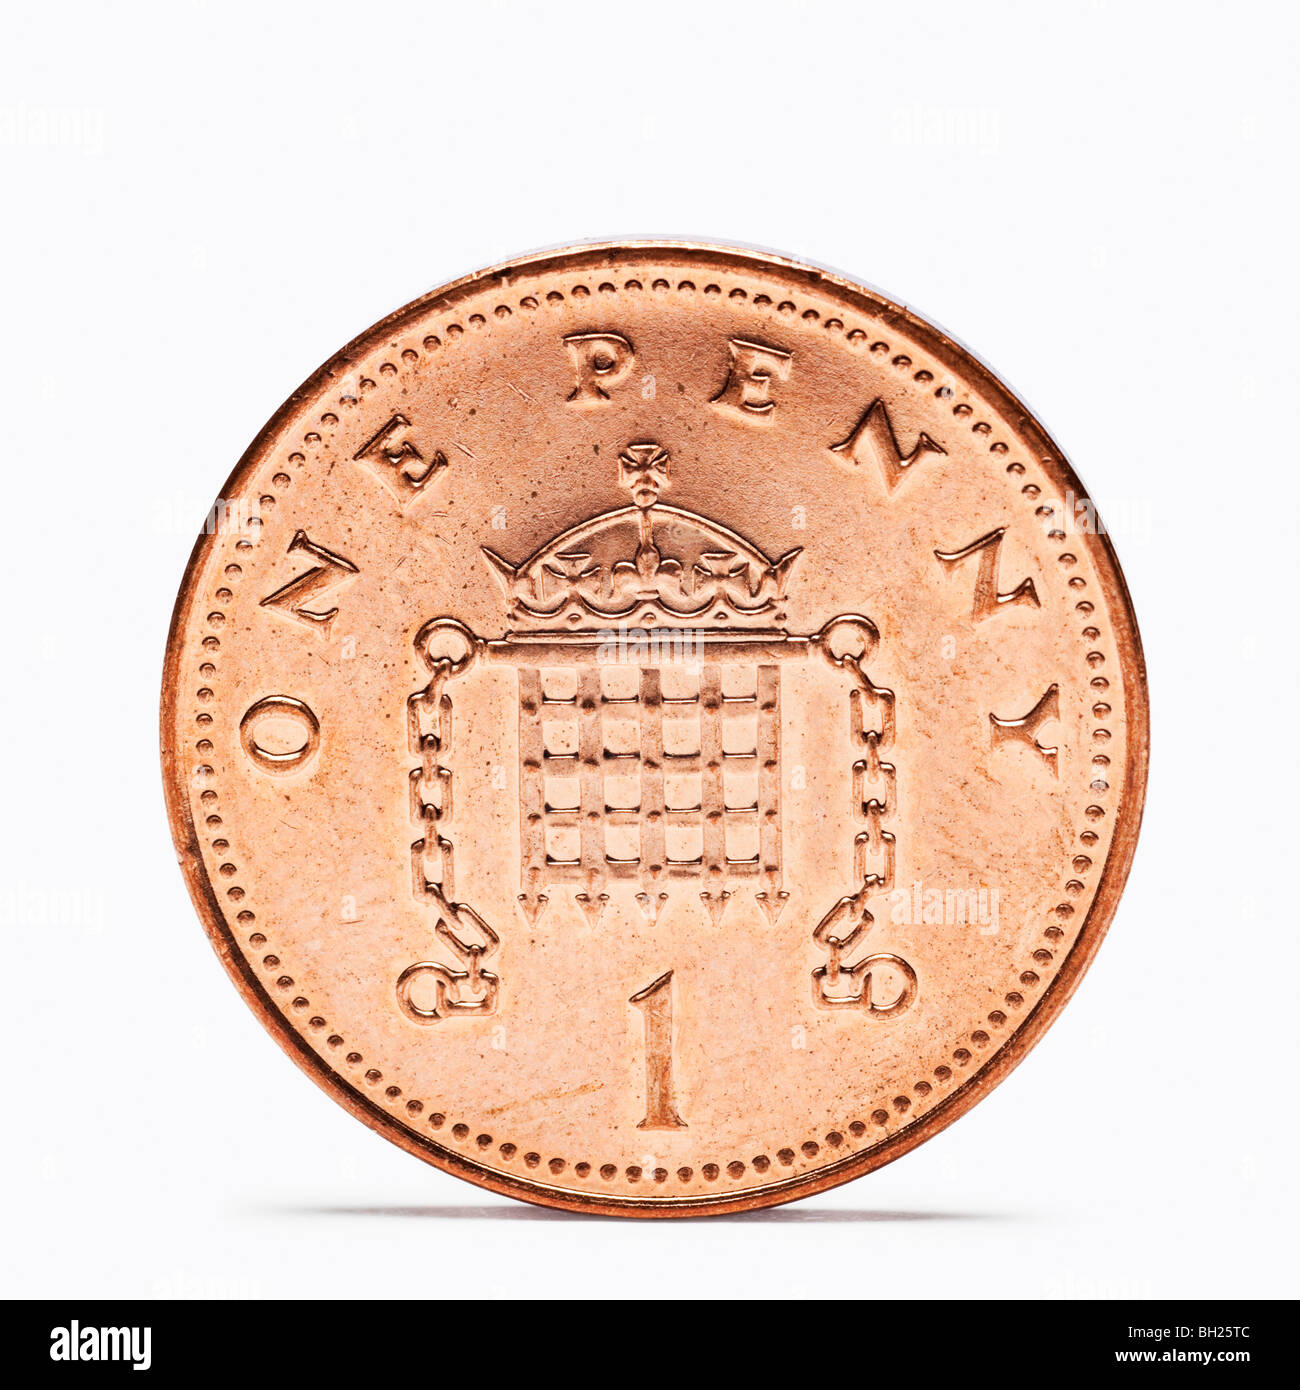 British One penny coin back view Stock Photo